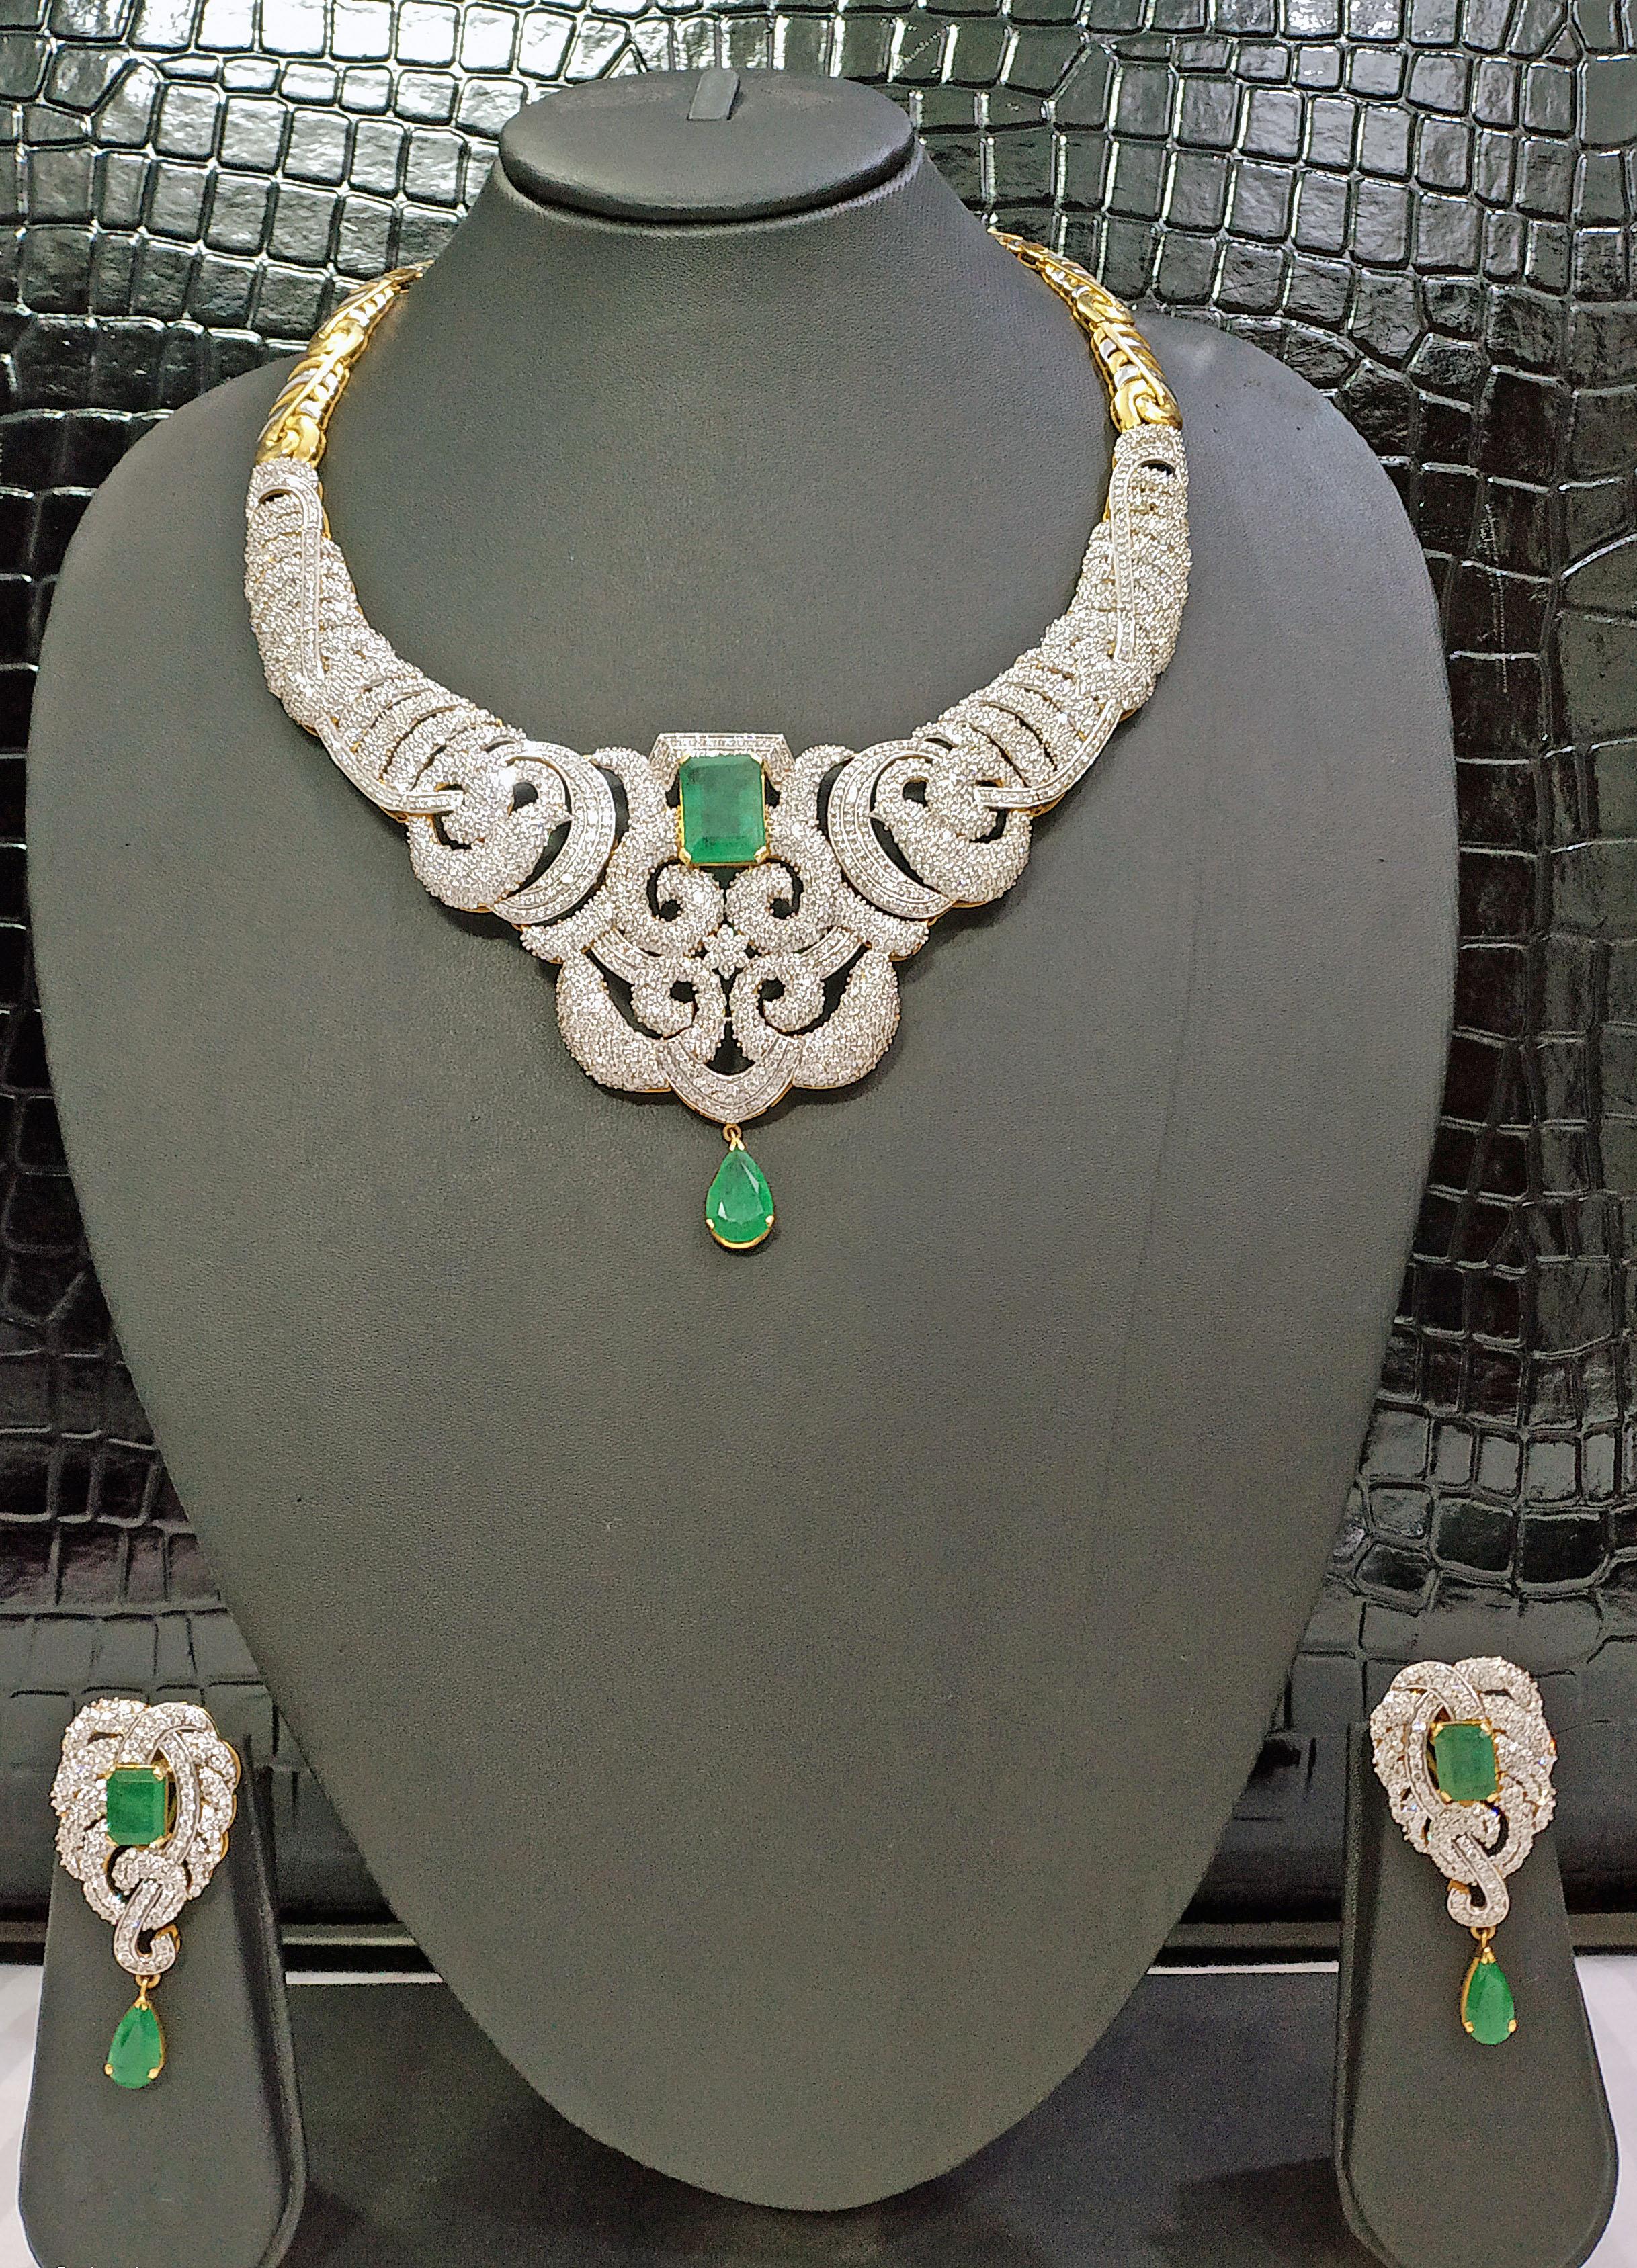 42 Carat Diamonds and 25 Carat Emerald Necklace and Earrings Set For Sale 5